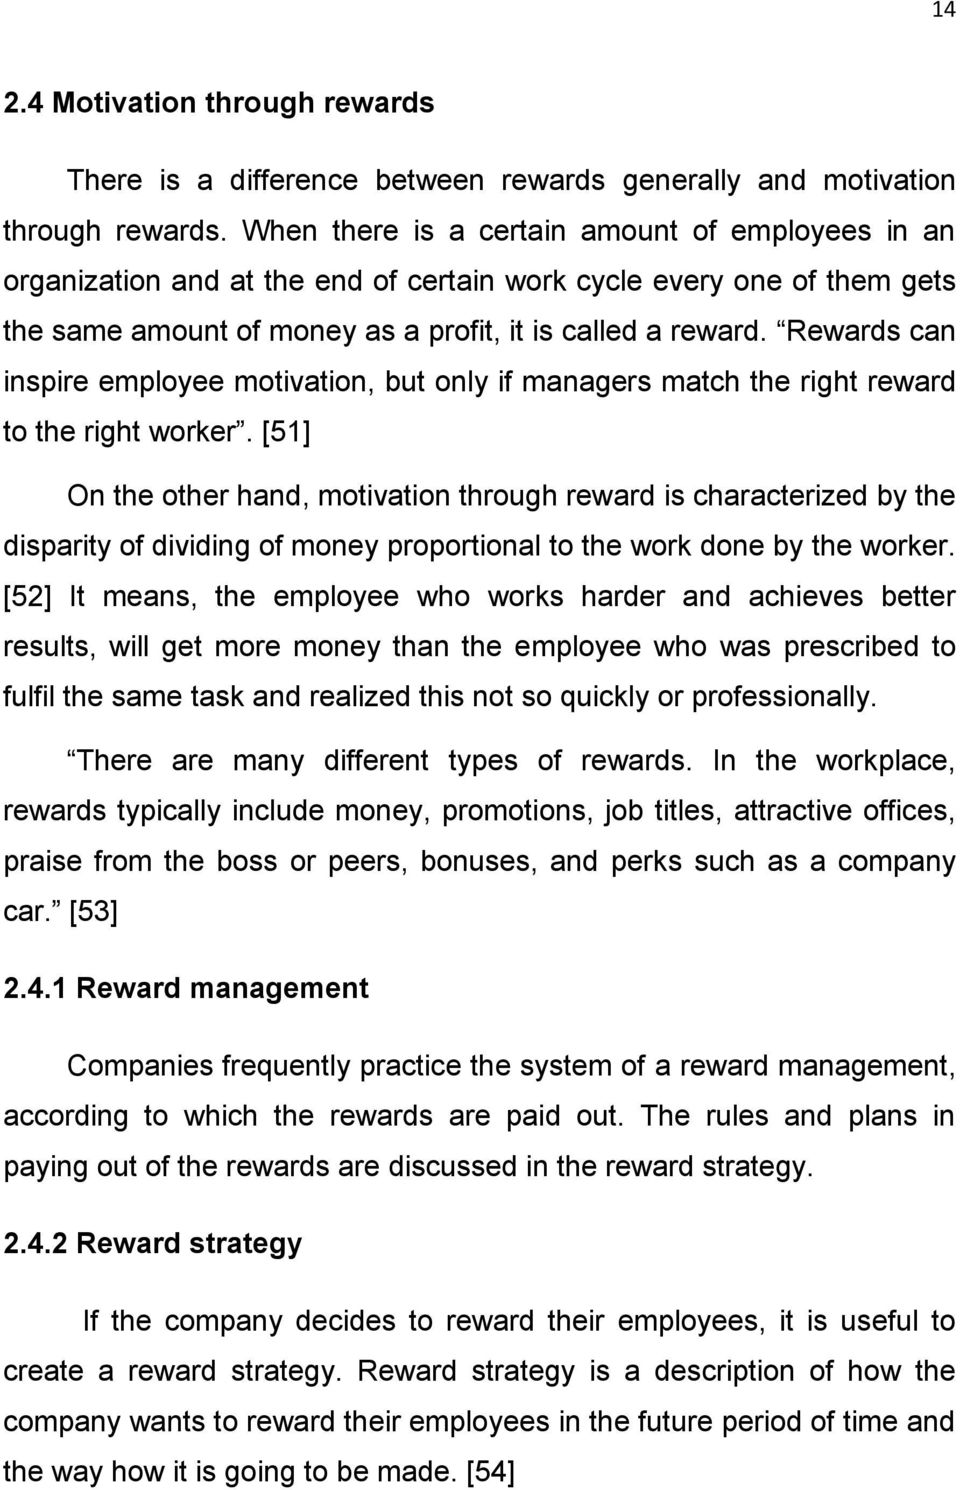 Rewards can inspire employee motivation, but only if managers match the right reward to the right worker.